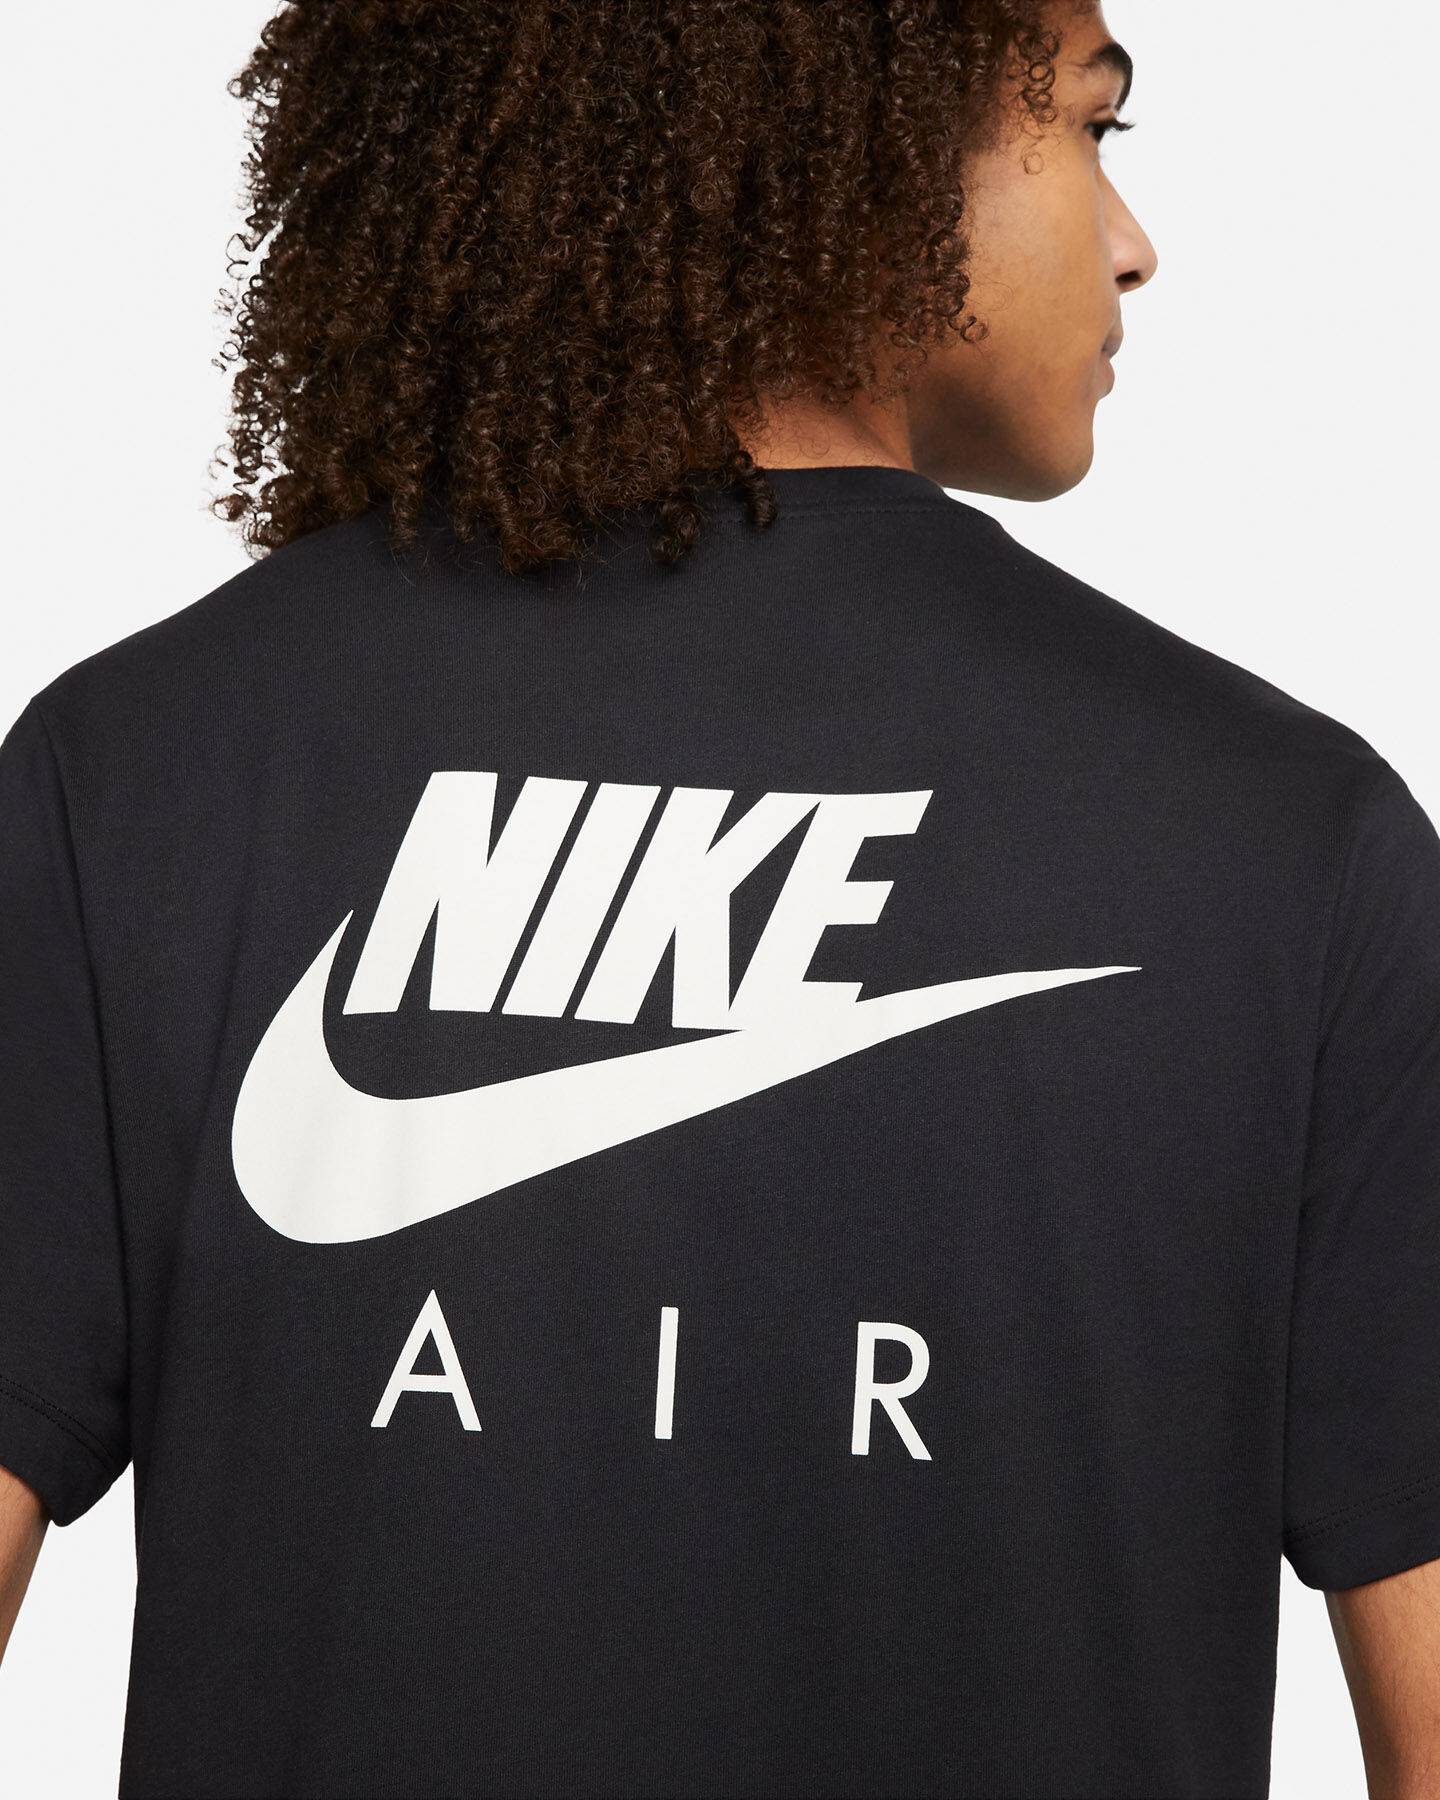  T-Shirt NIKE AIR M S5374493|010|XS scatto 2